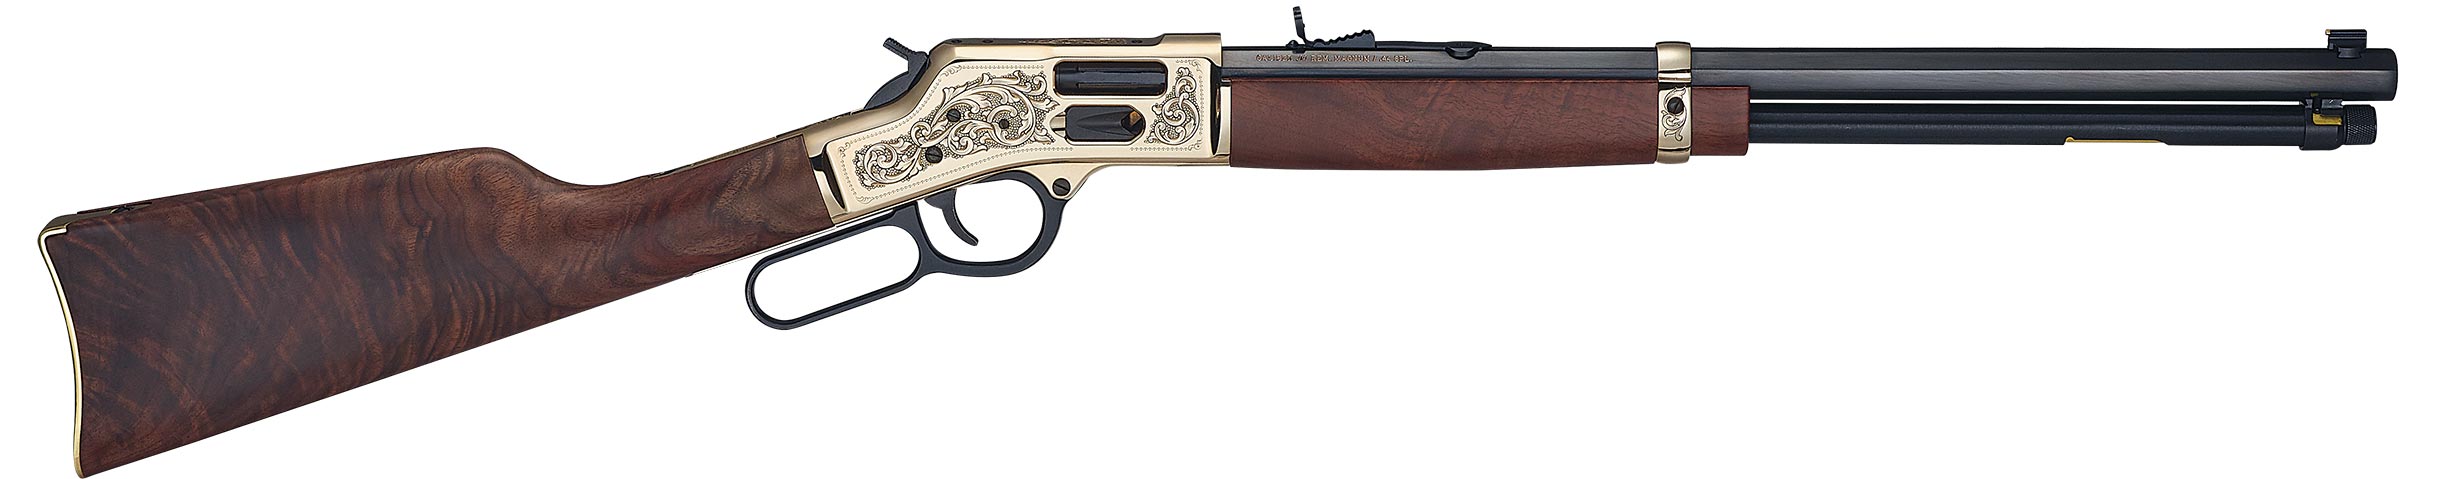 Big Boy Brass Deluxe Engraved Edition | Henry Repeating Arms